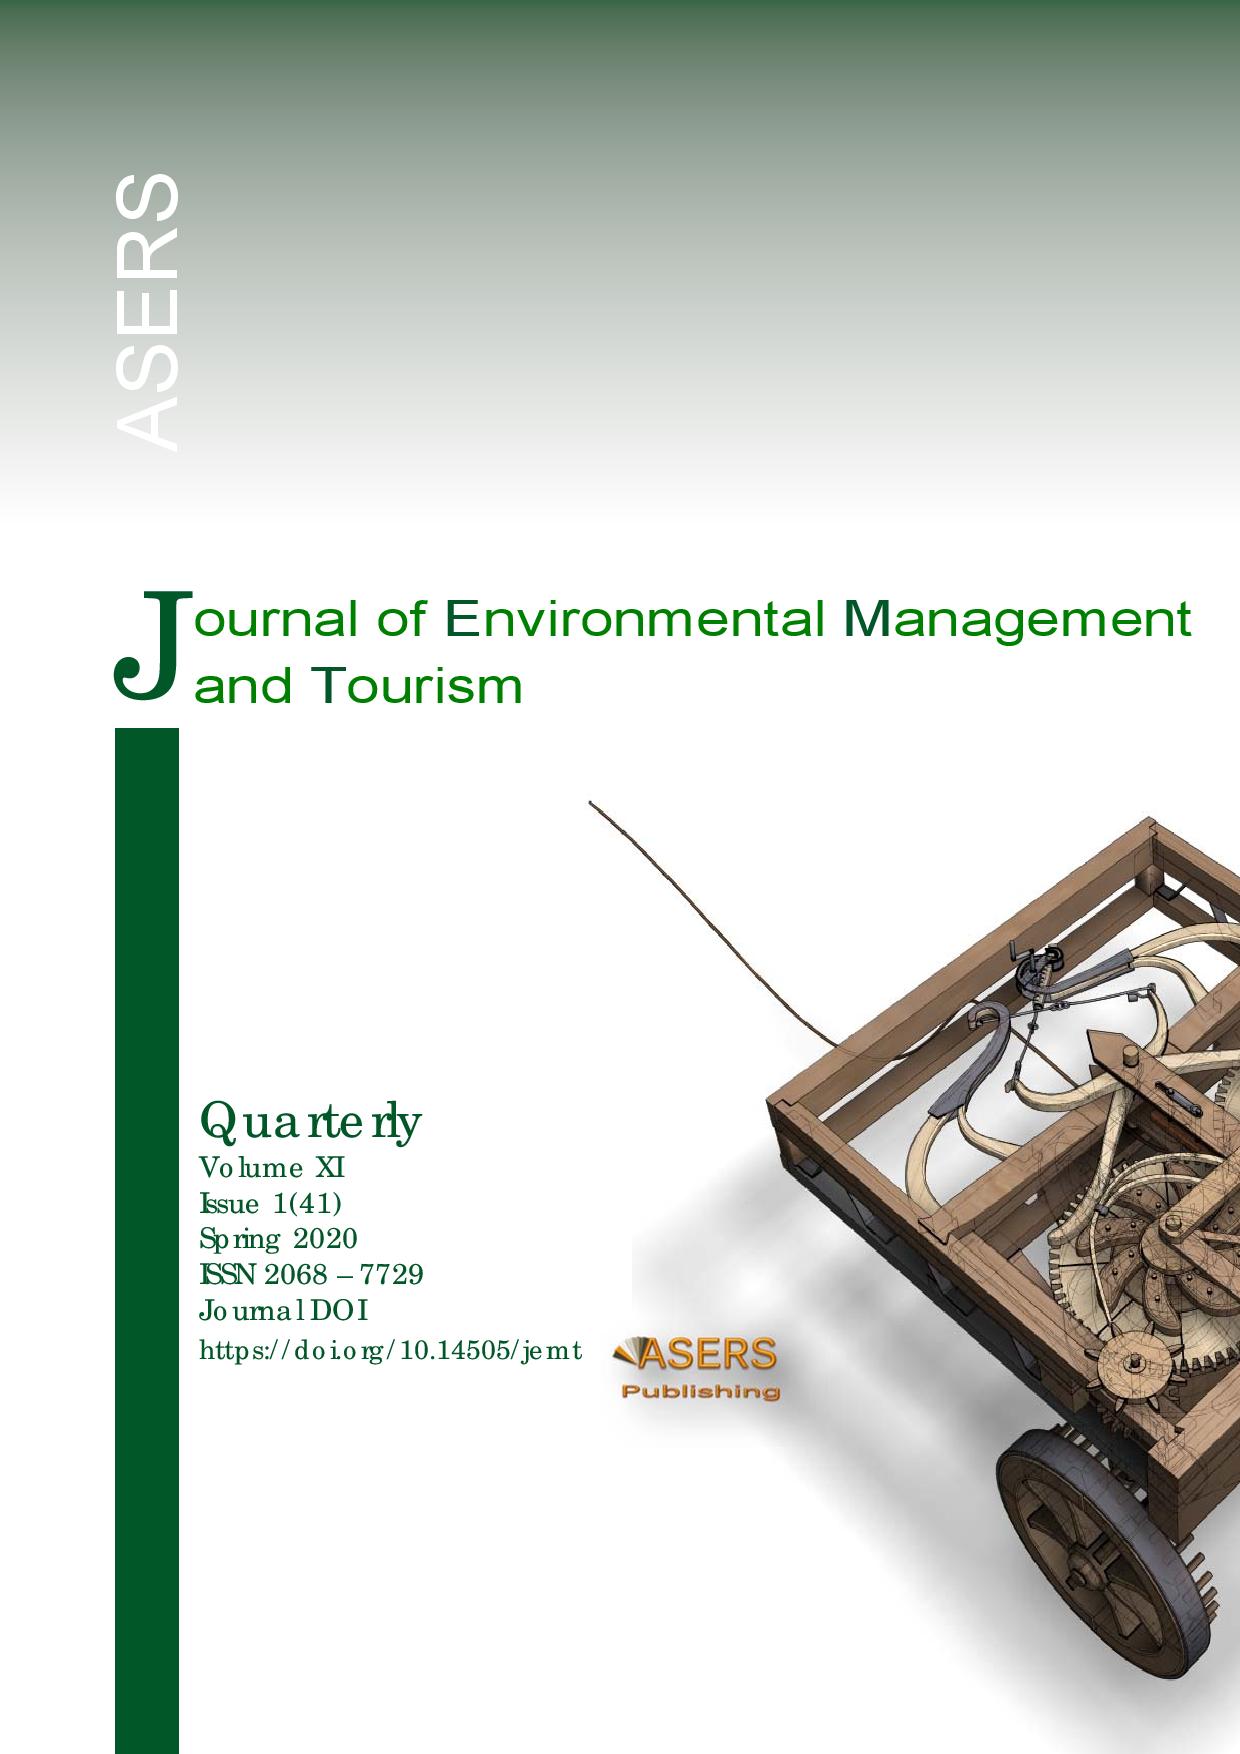 Development of Industrial and Urban Areas in the Context of Ecological and Economic Security